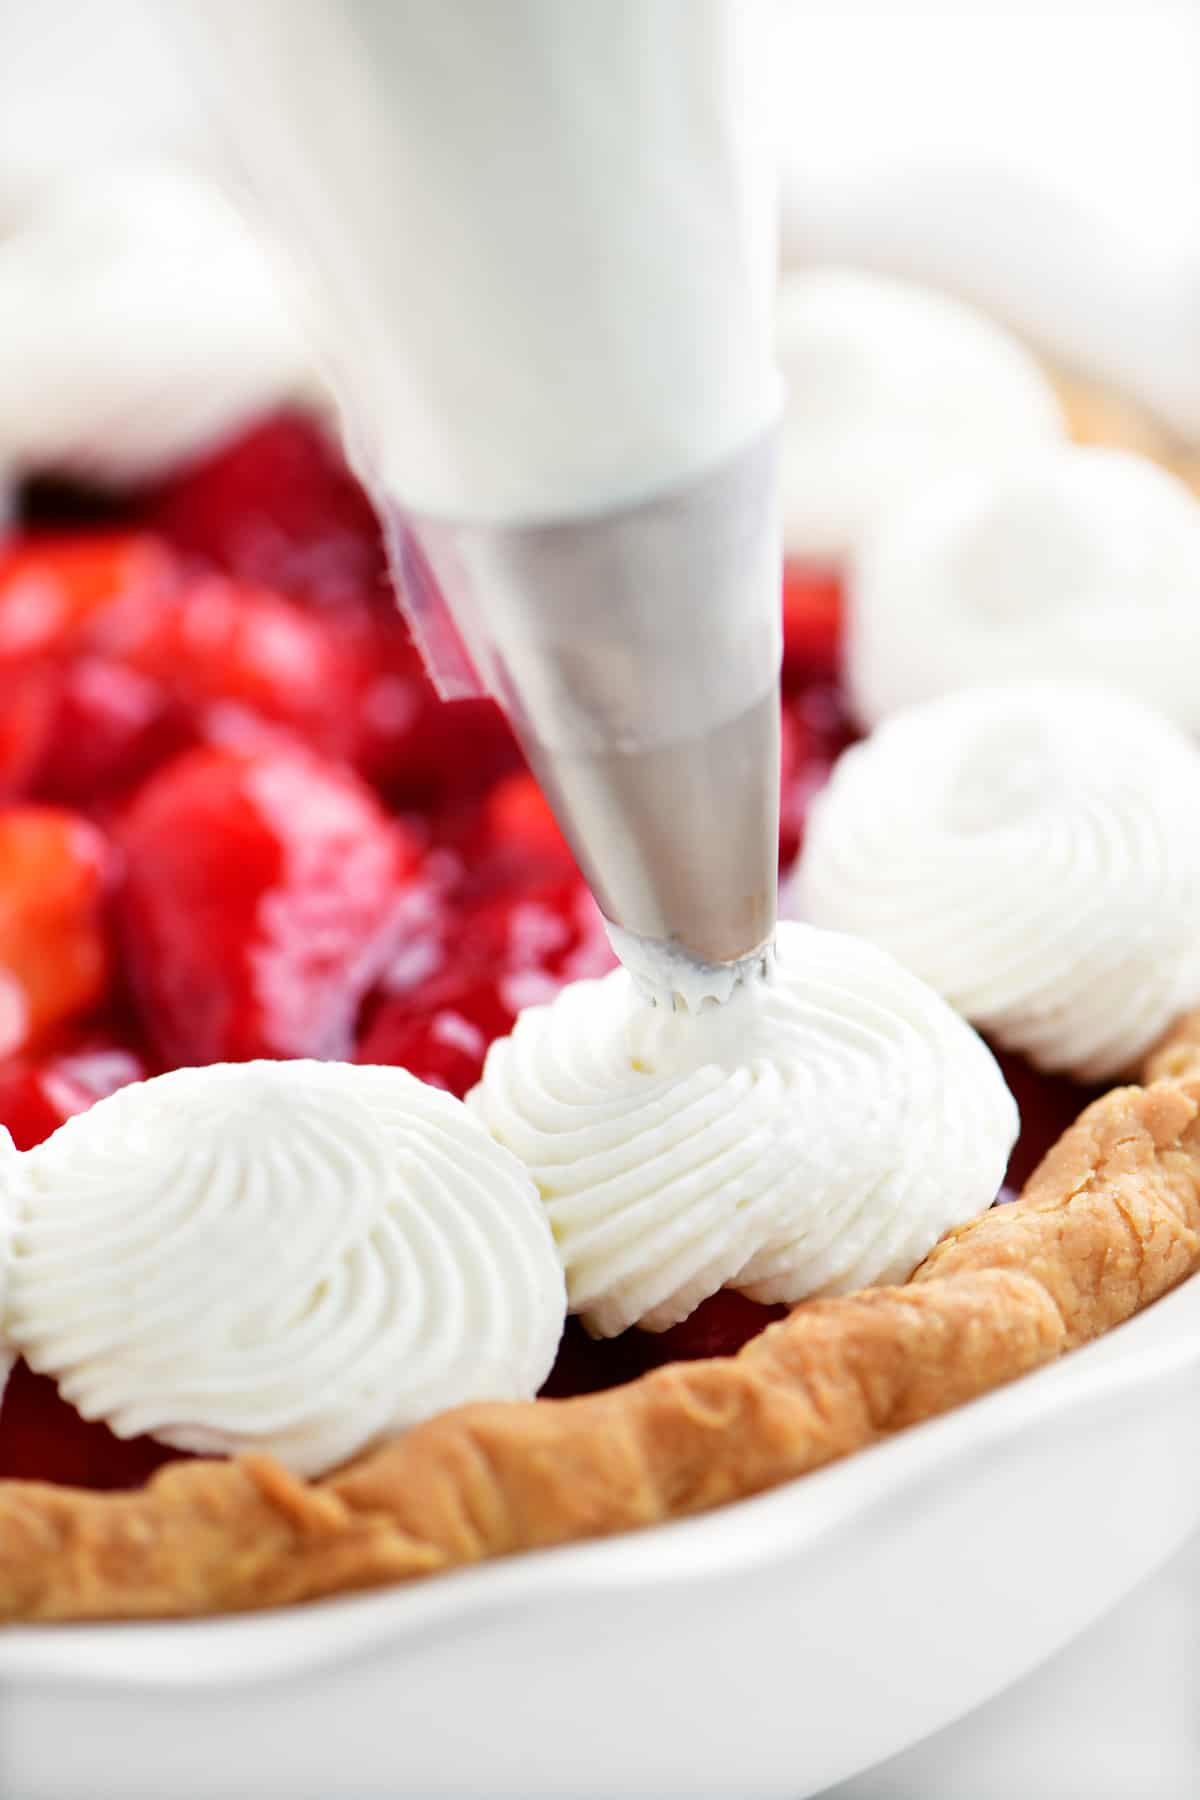 a piping bag piping whipped cream on to a pie